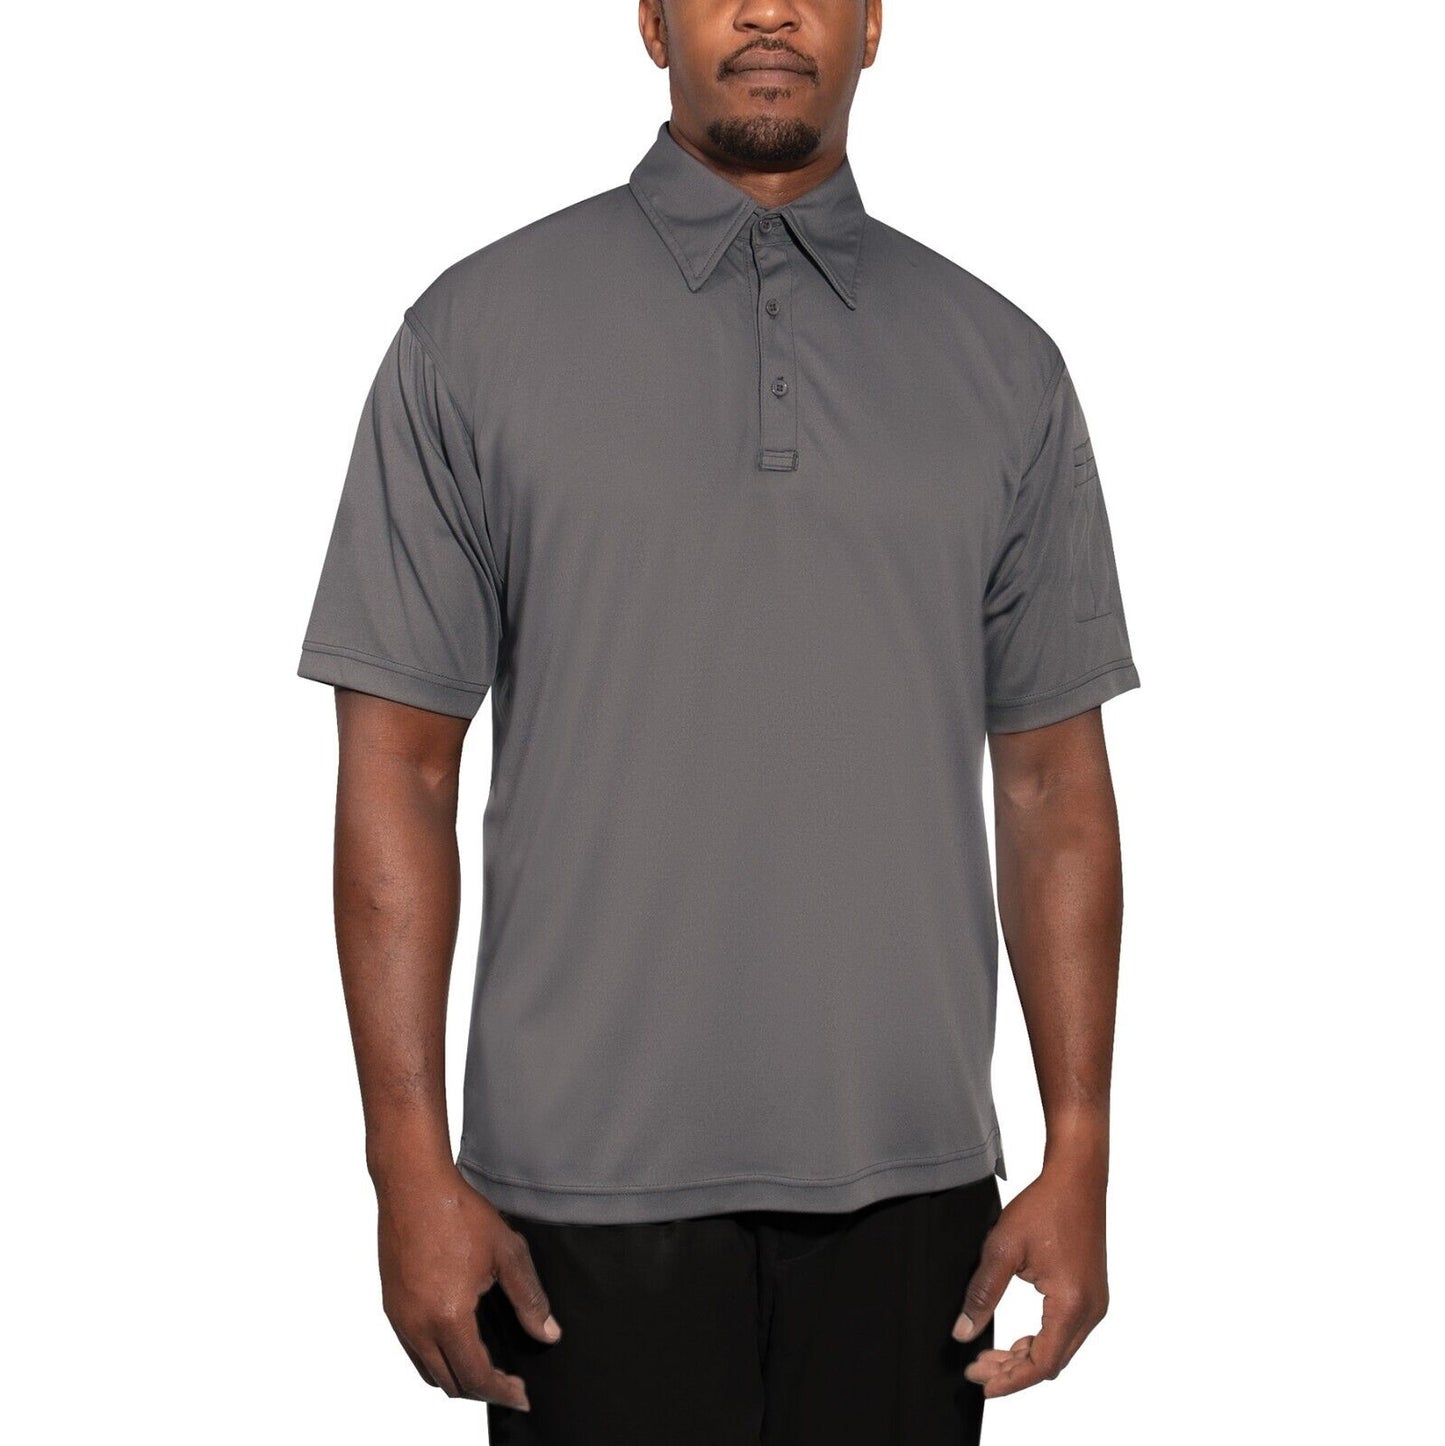 Men's Tactical Performance Polo Shirt In Grey or Red 3-Button Polyester Golf